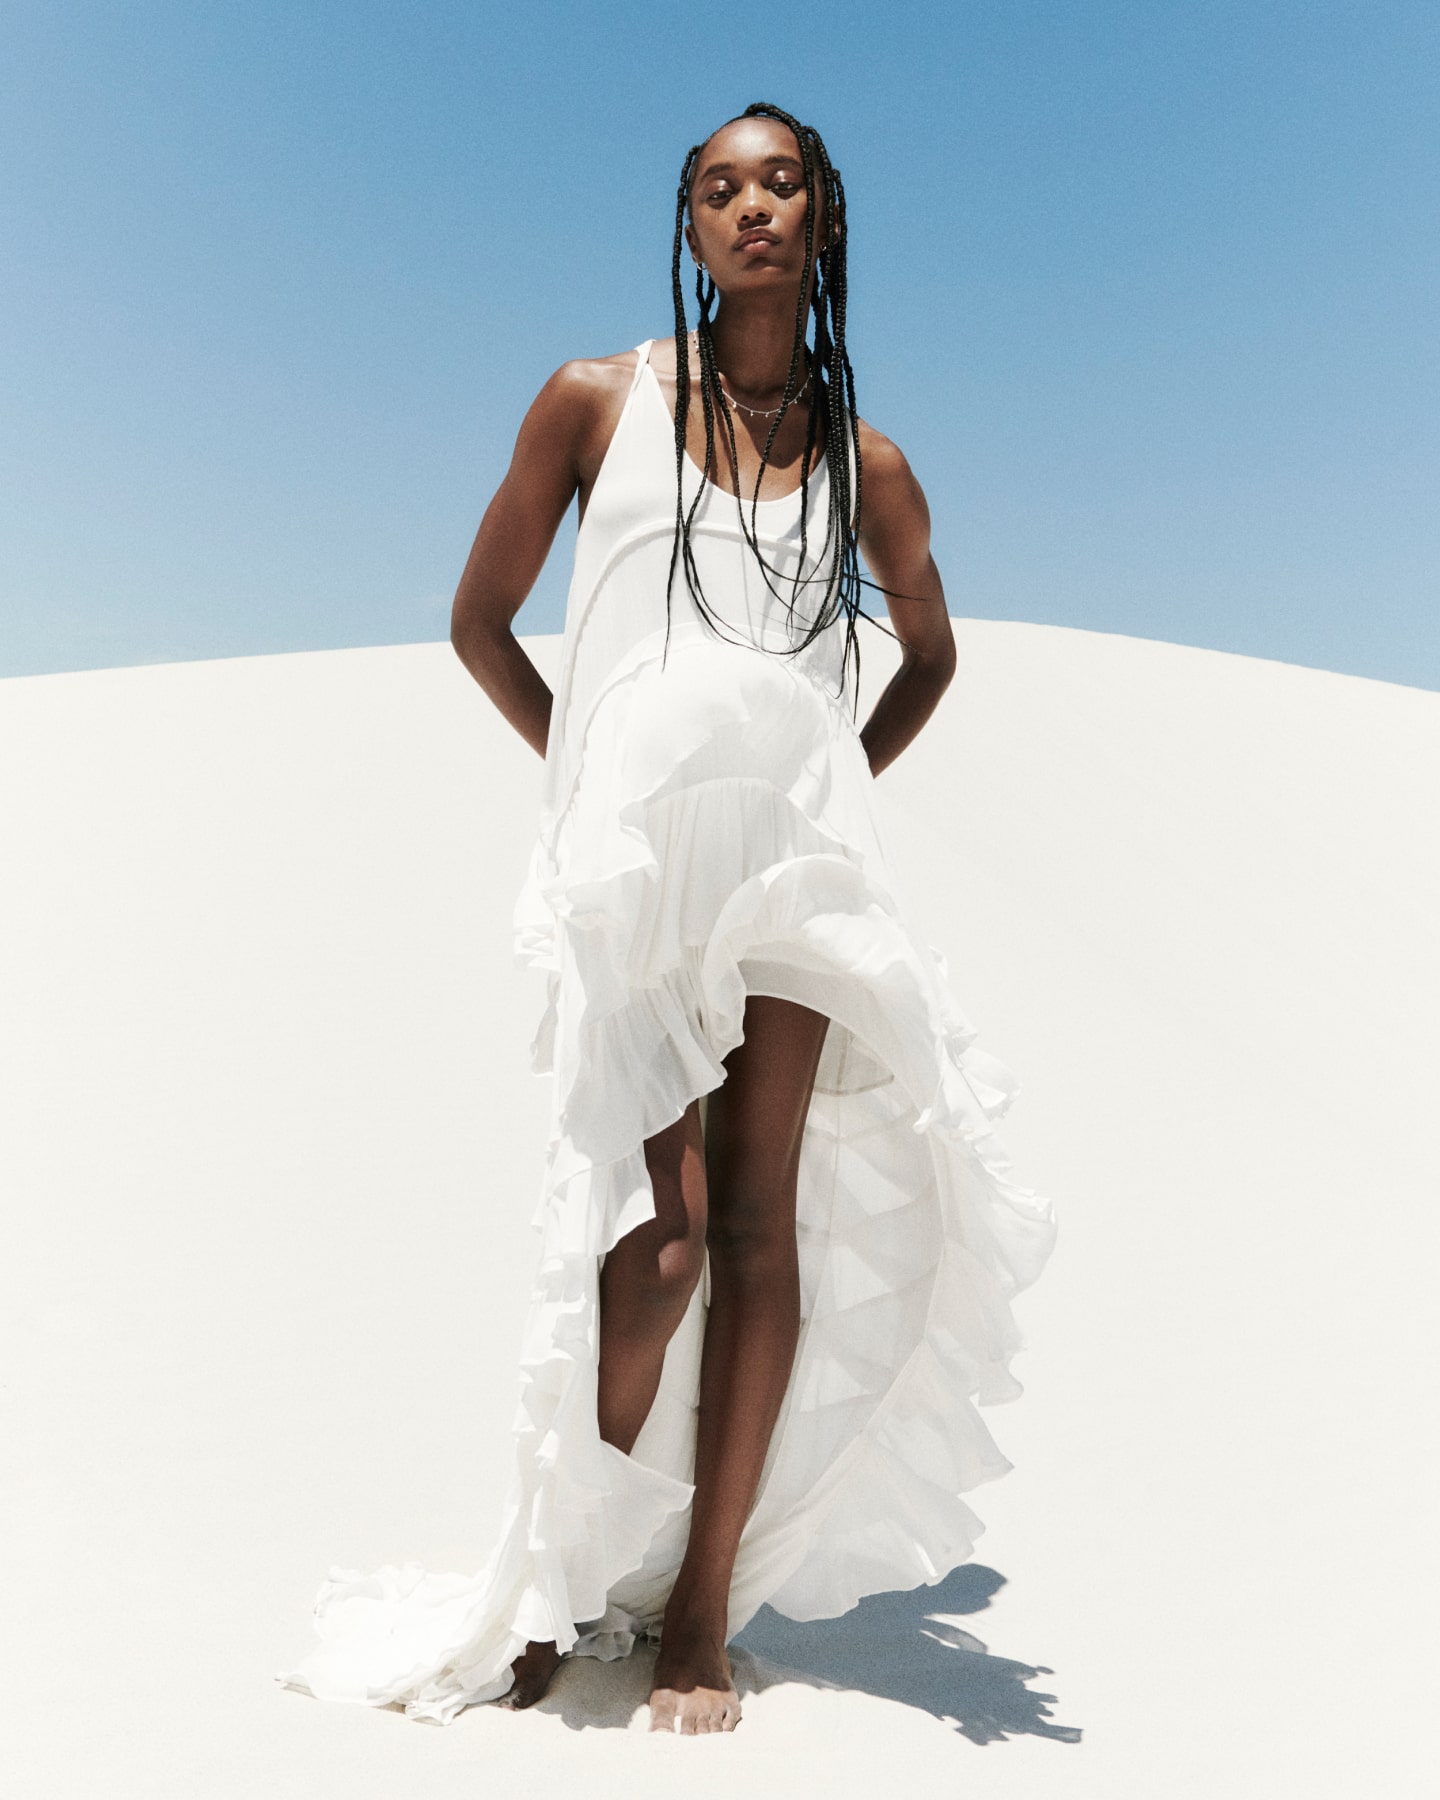 A woman wearing an asymmetrical white dress standing in front of a white dune.